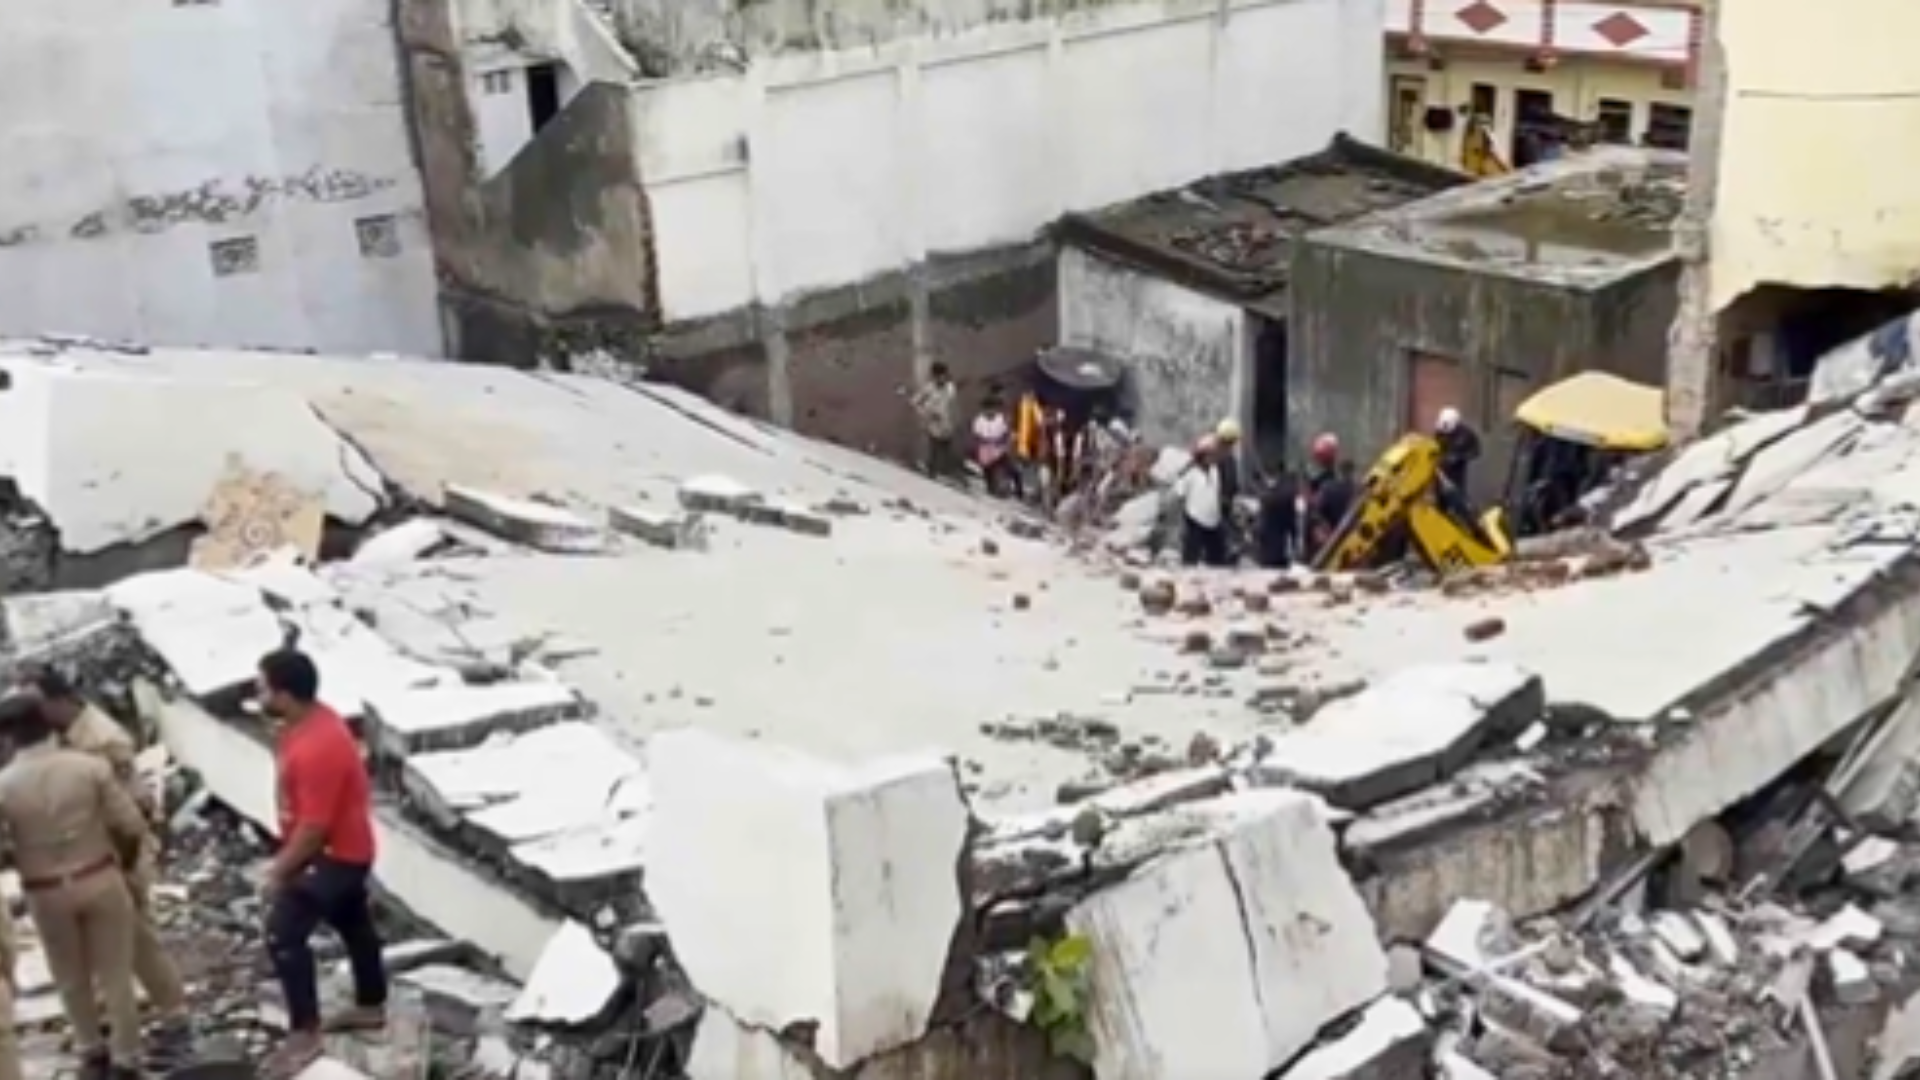 Gujarat: Multi-Storey Building Collapses In Surat Injuring 15, Several Feared Trapped